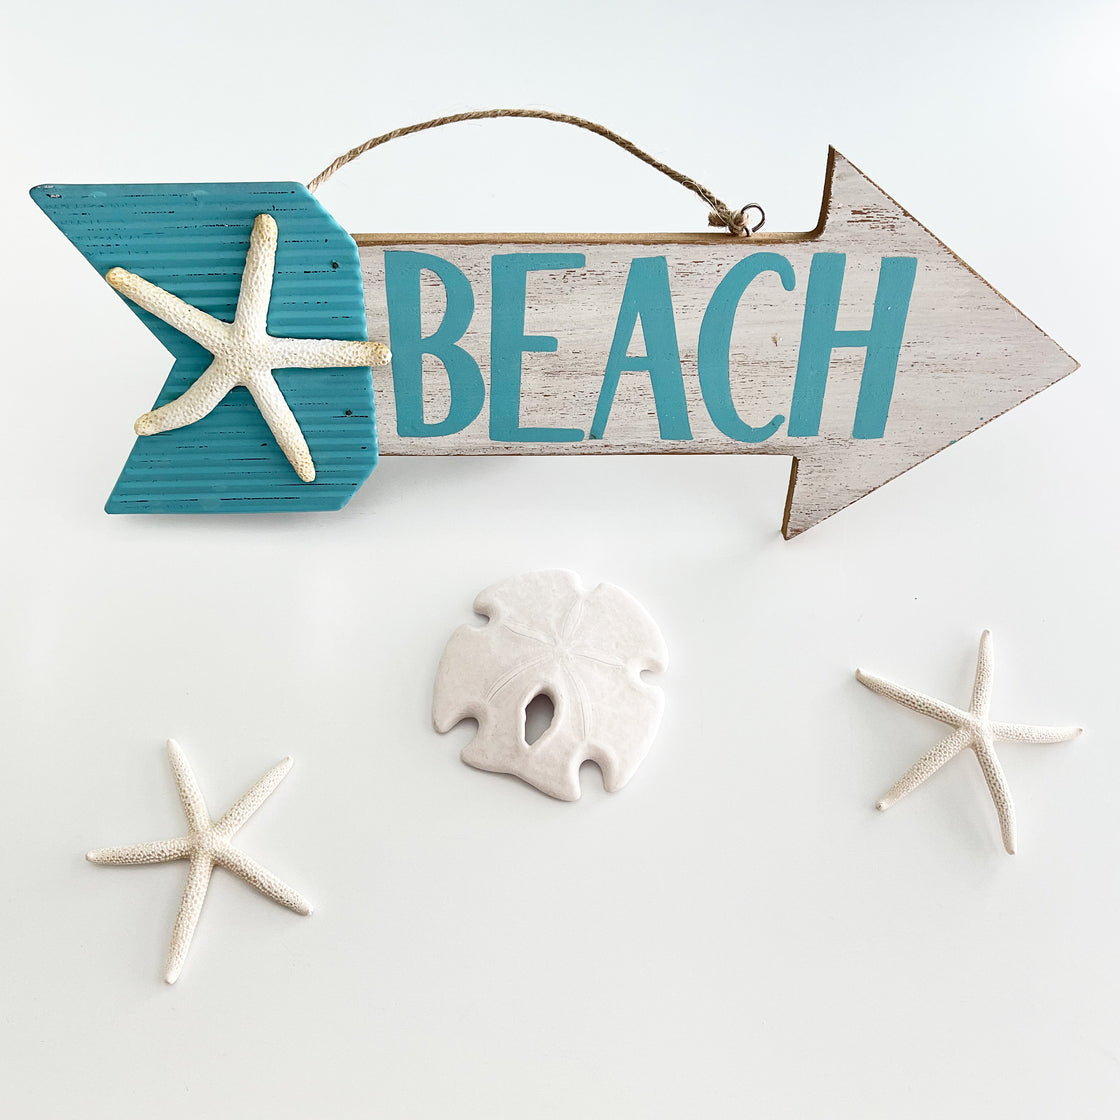 Teal Blue Beach Arrow Wood Sign with Starfish Accent and Jute Rope